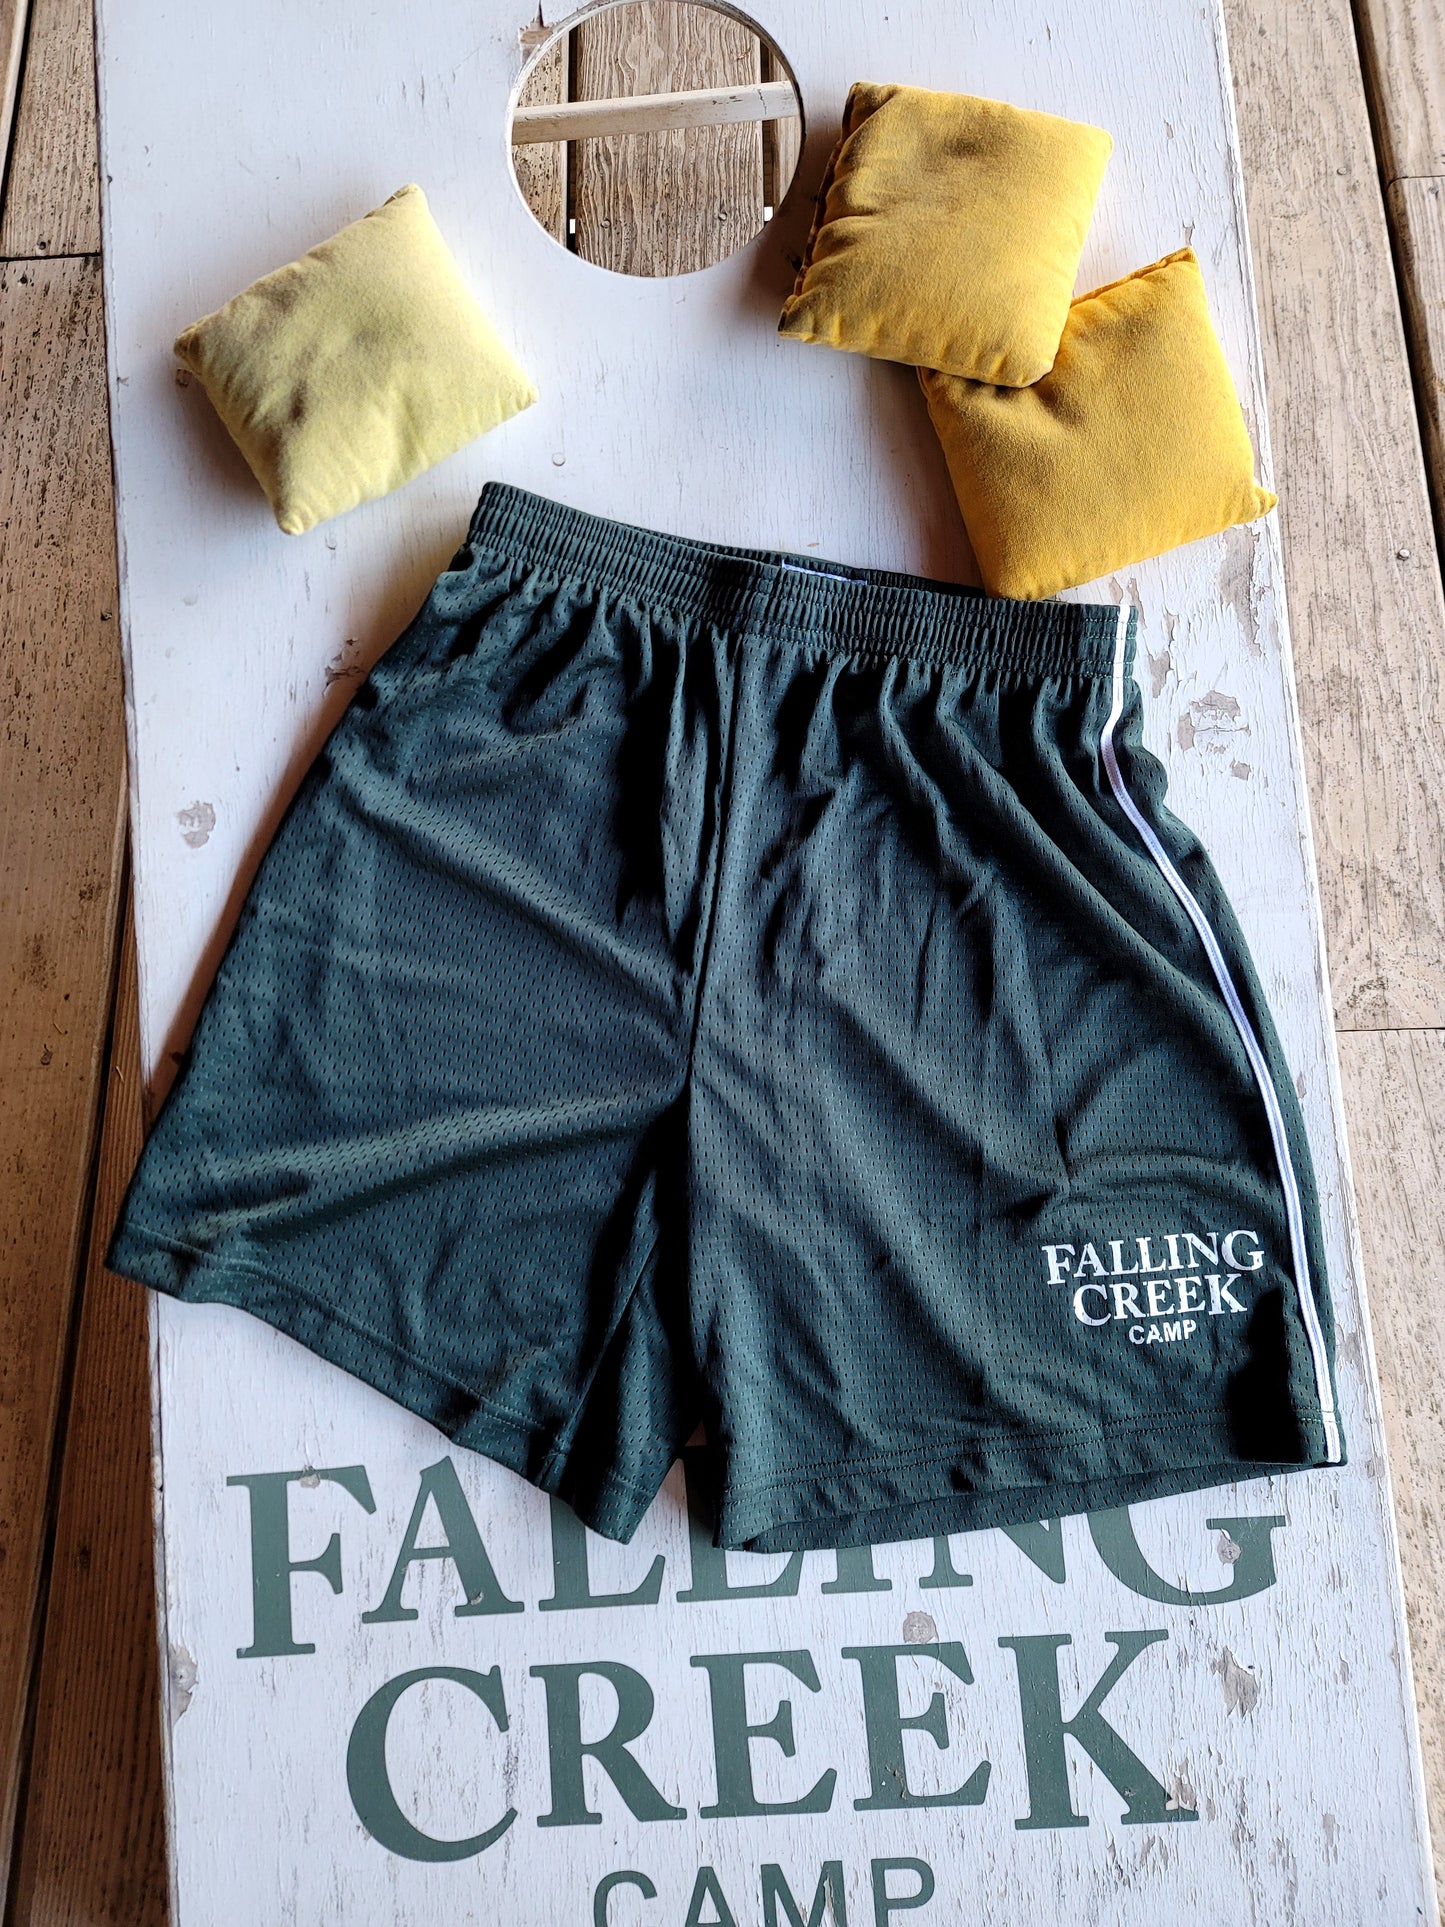 Green Athletic Training Shorts with White Stripe and Falling Creek Camp Logo on Left Leg. Pictured on a cornhole board.